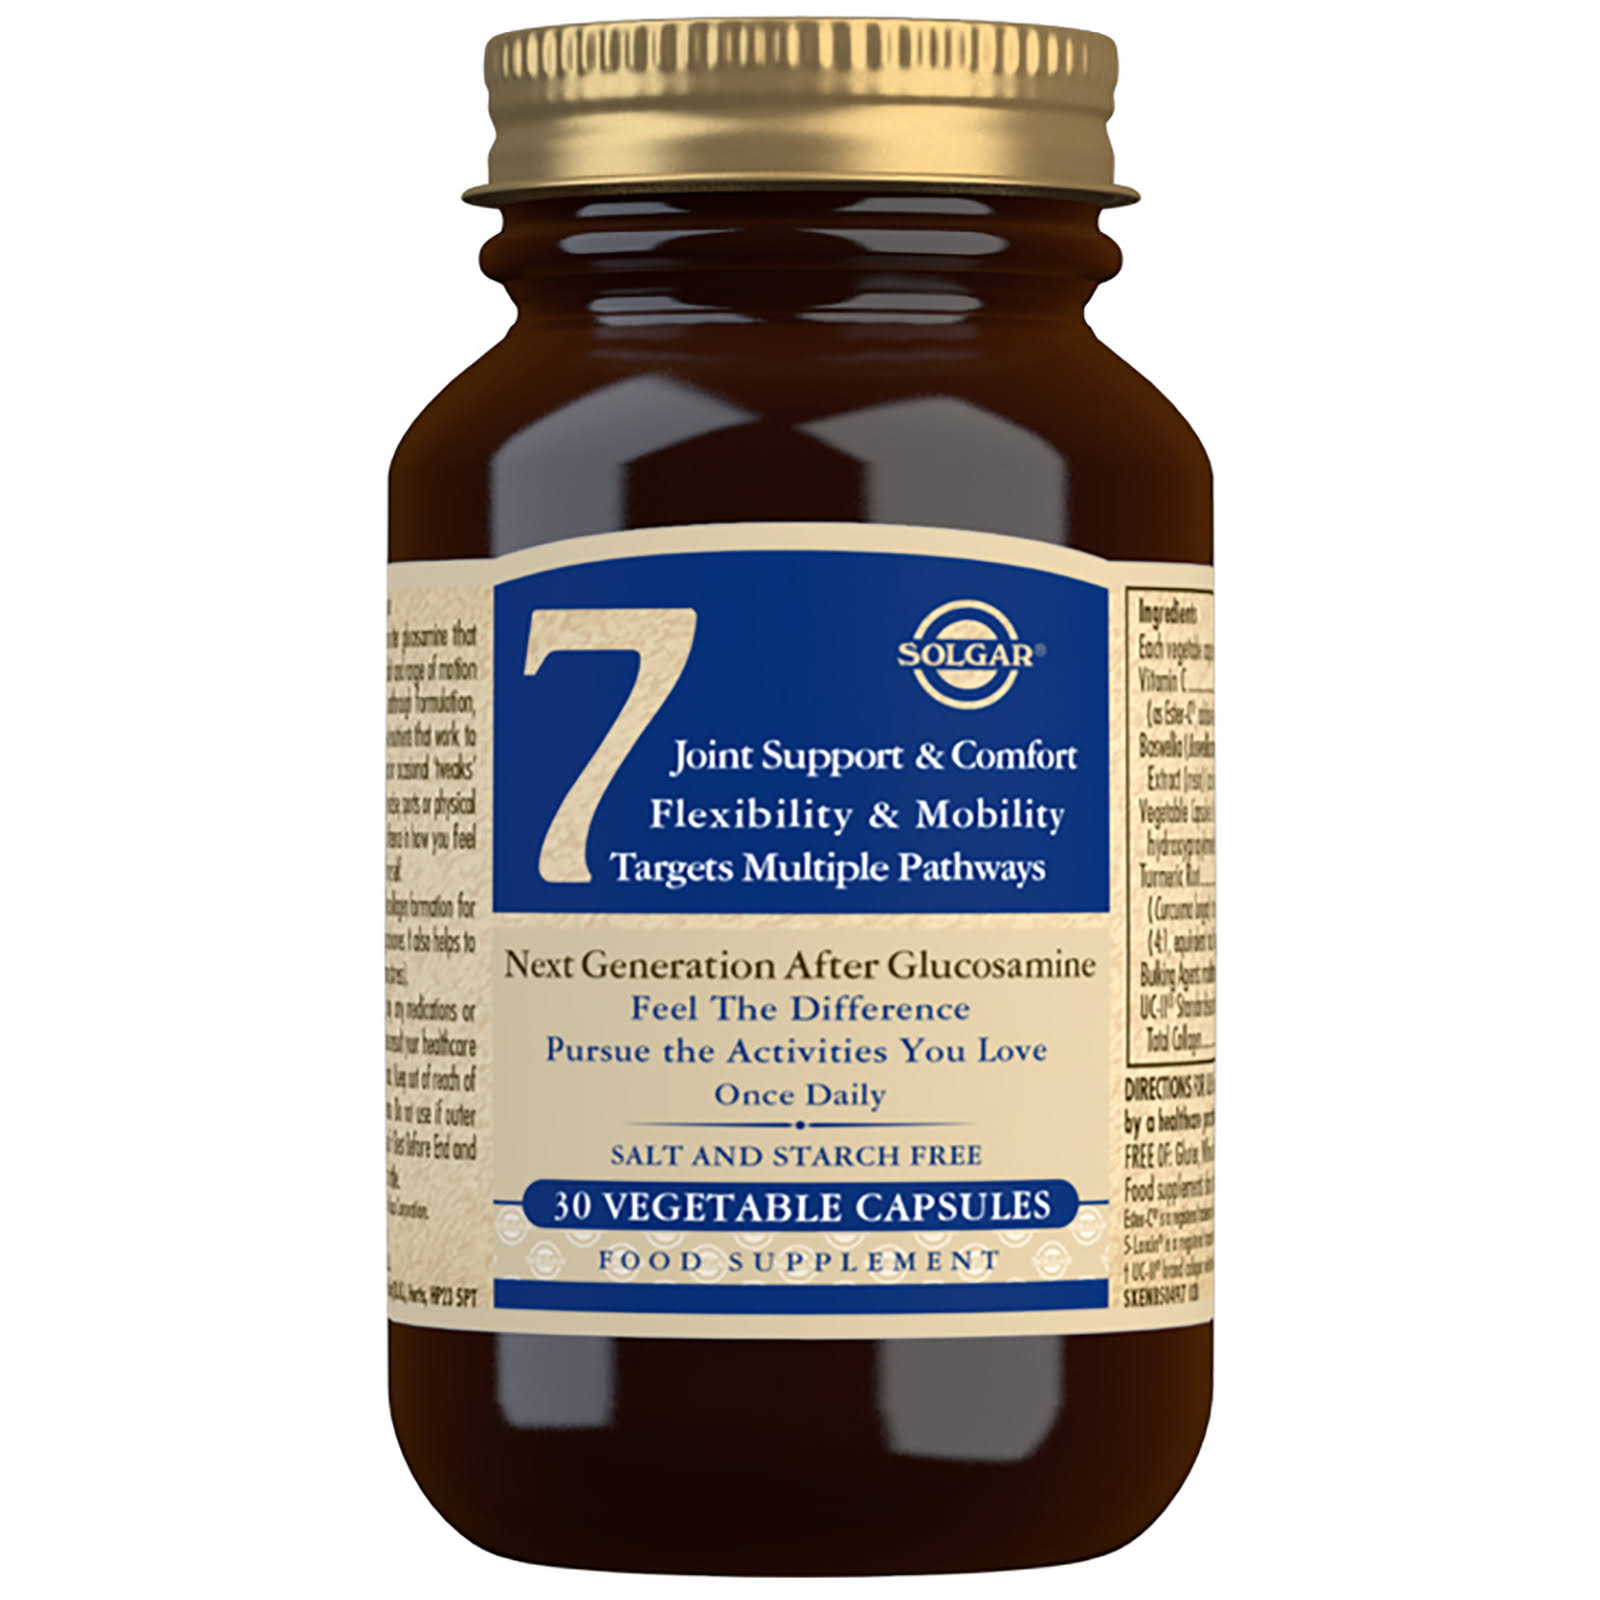 Solgar No. 7 Joint Support & Comfort Dietery Supplement - 30 Capsules